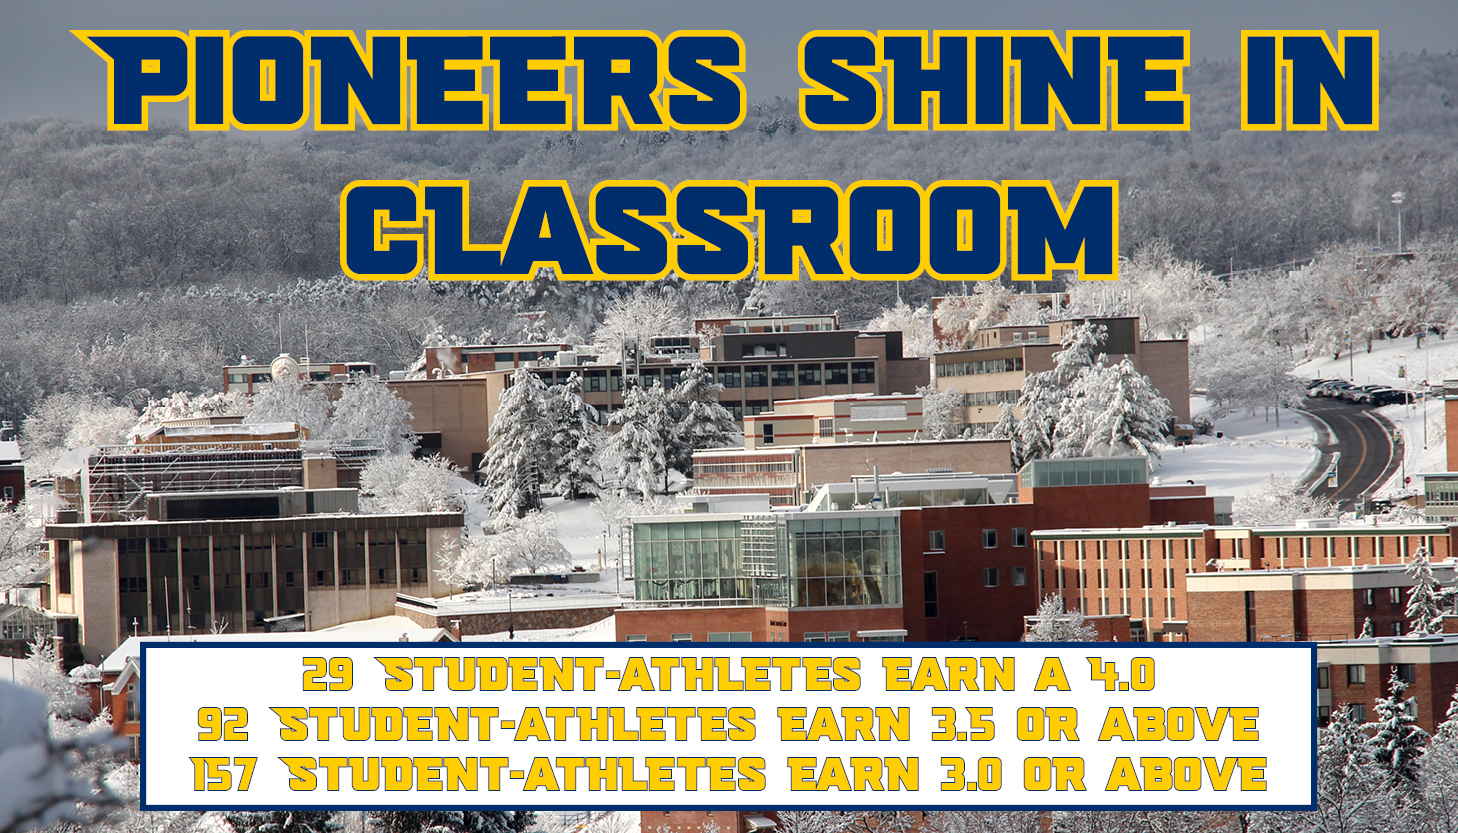 Pioneers Shine in Classroom - picture features snowy picture of campus!